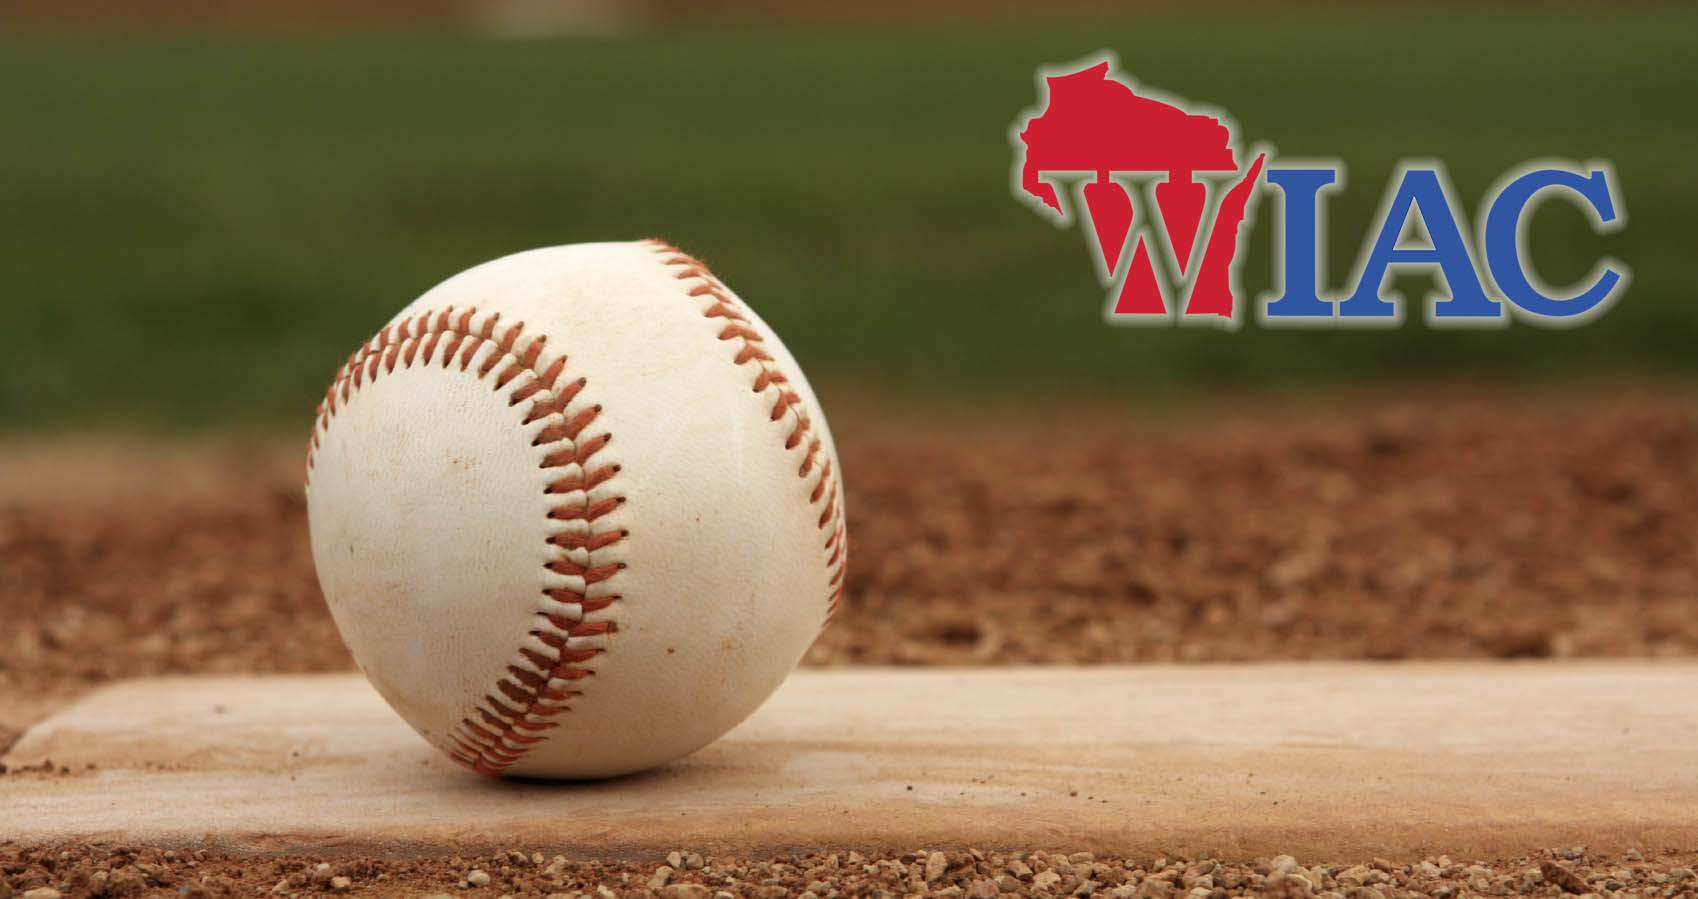 Titans Voted For Third Place In WIAC Baseball Standings